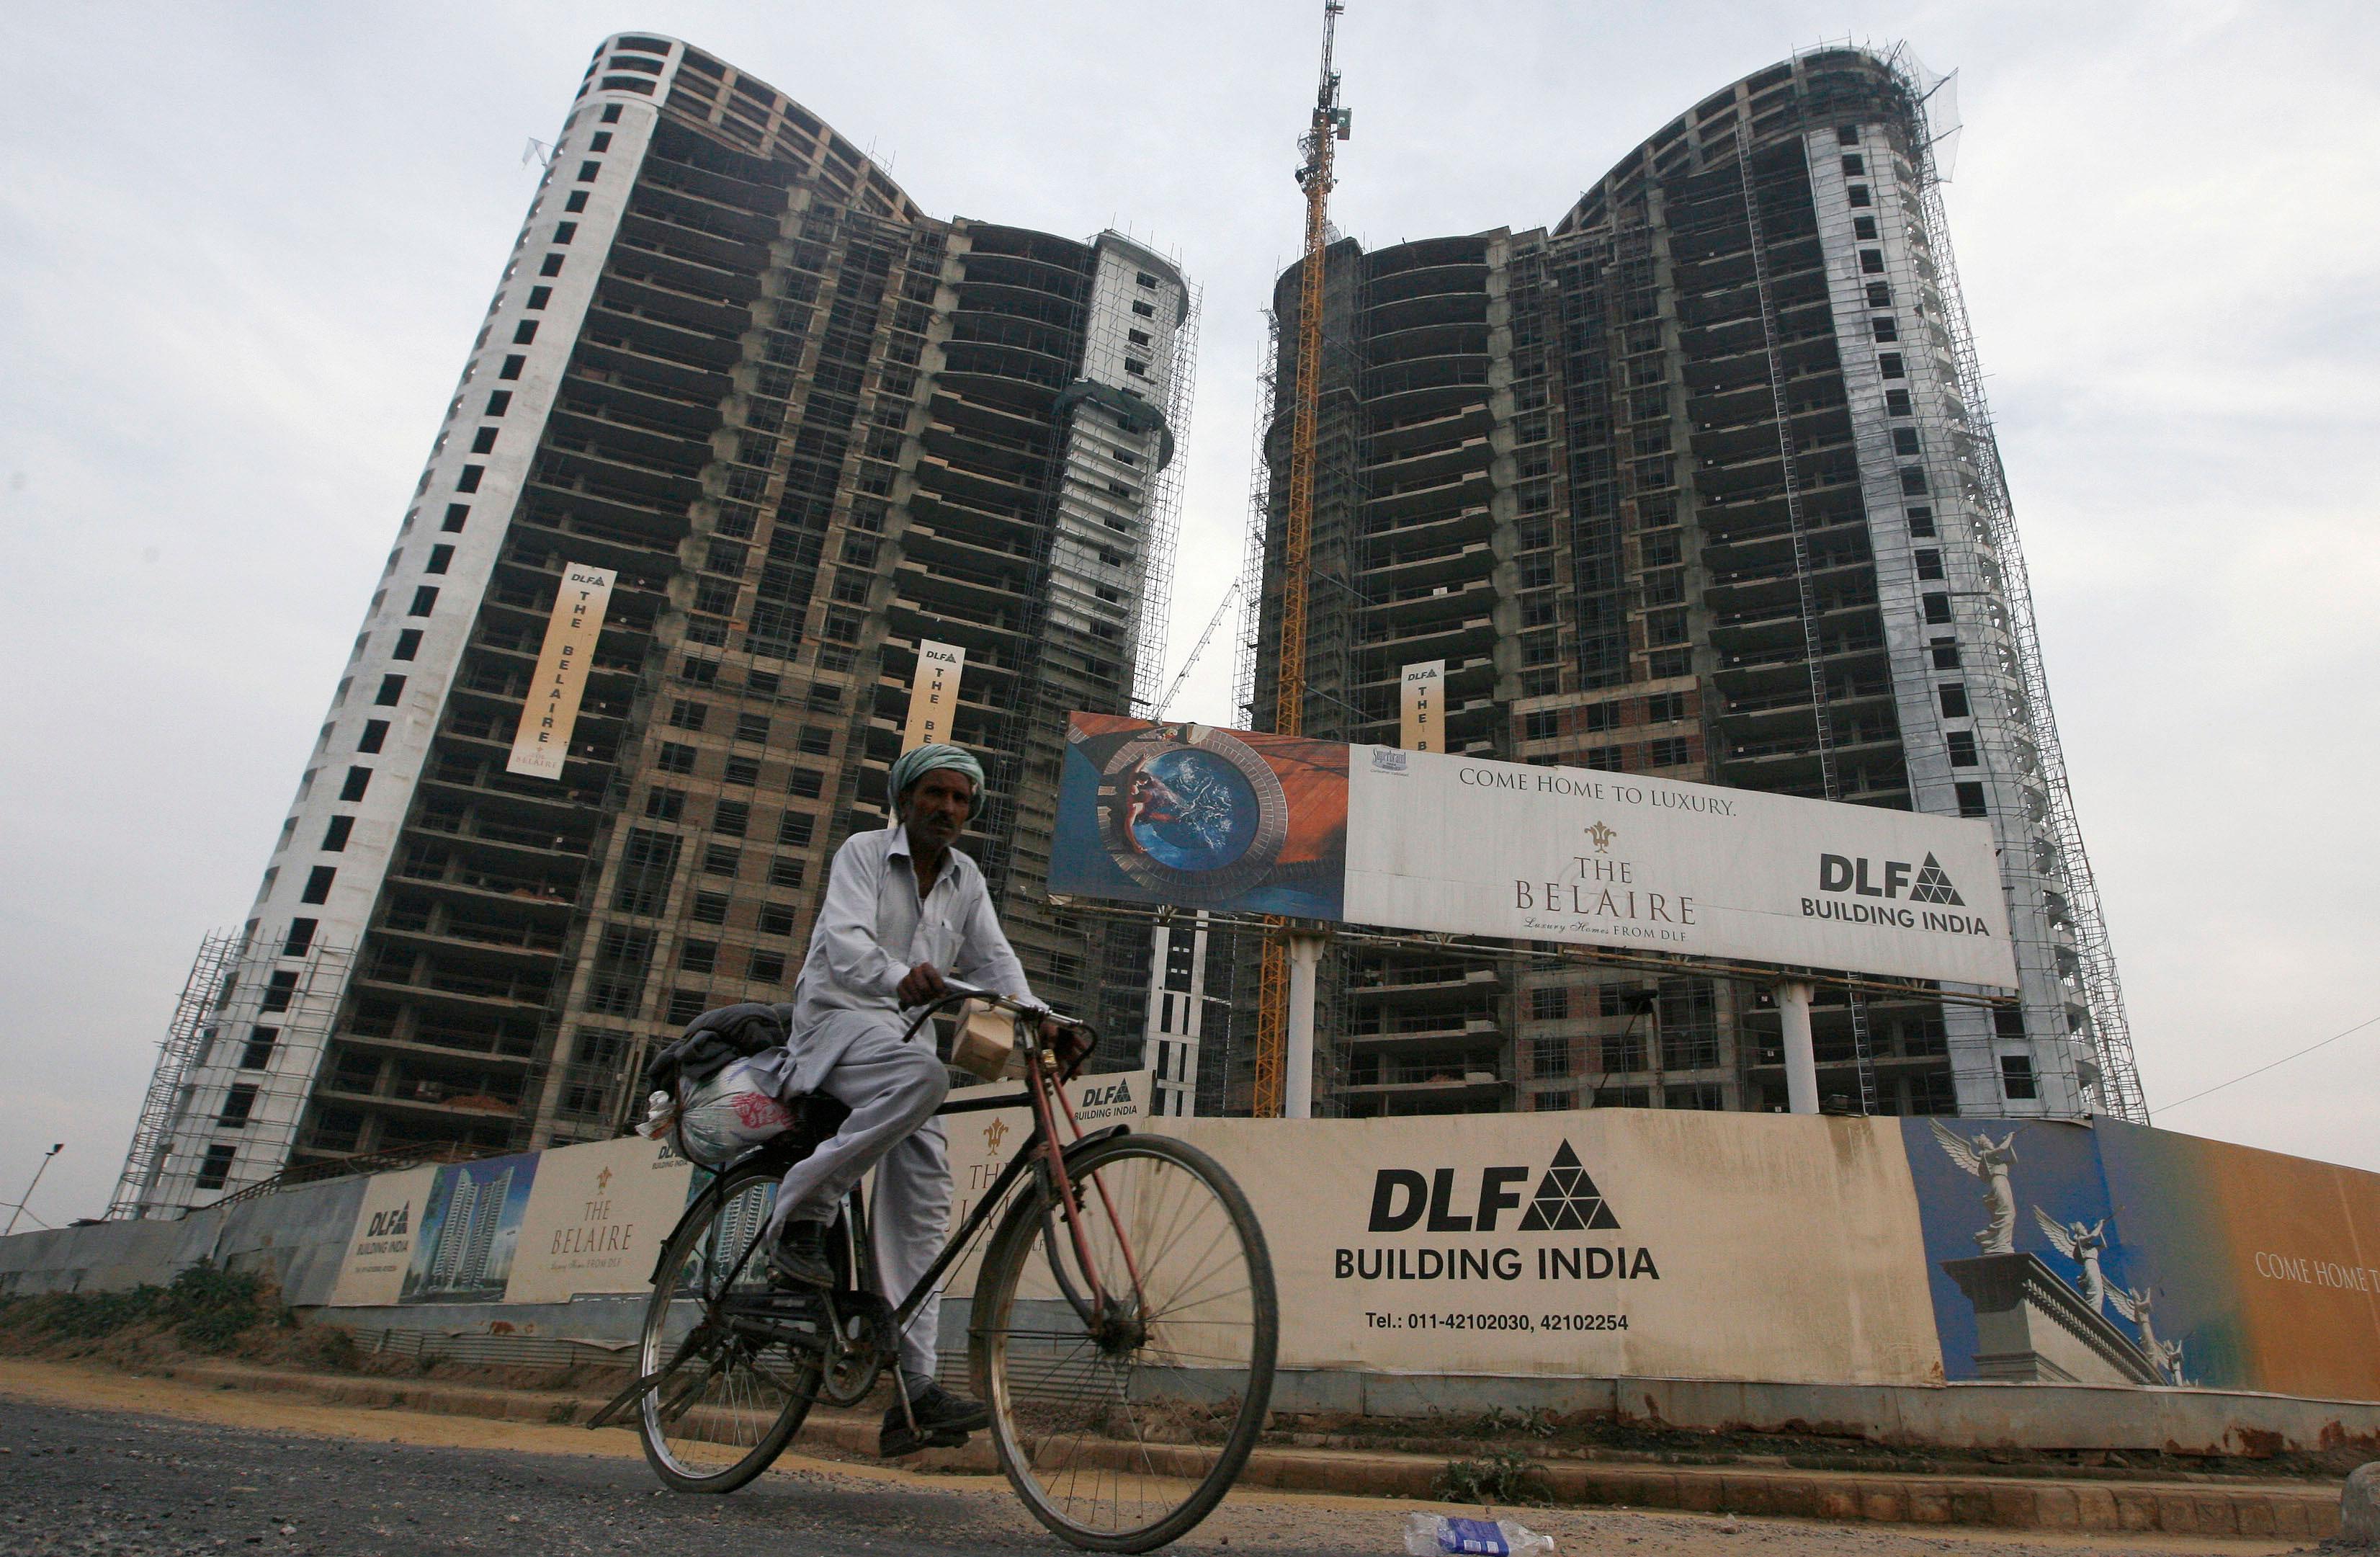 DLF appoints bankers to sell promoters’ stake in rental business